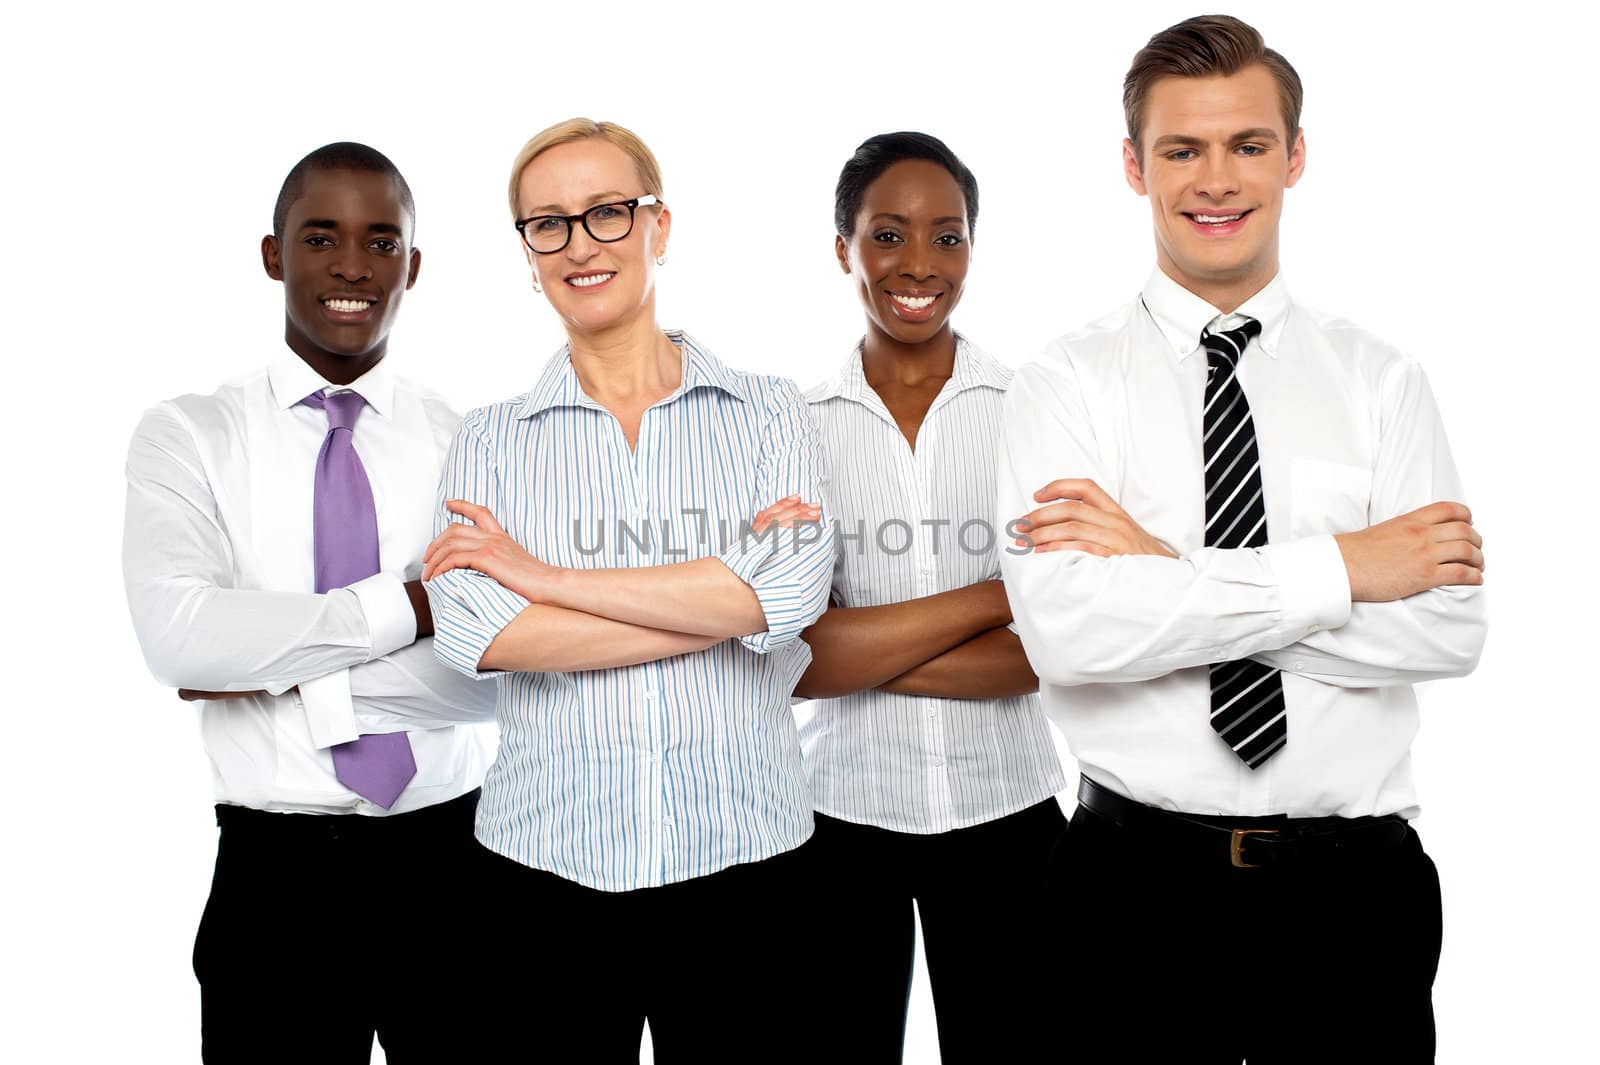 Group of business people posing with arms crossed in front of camera